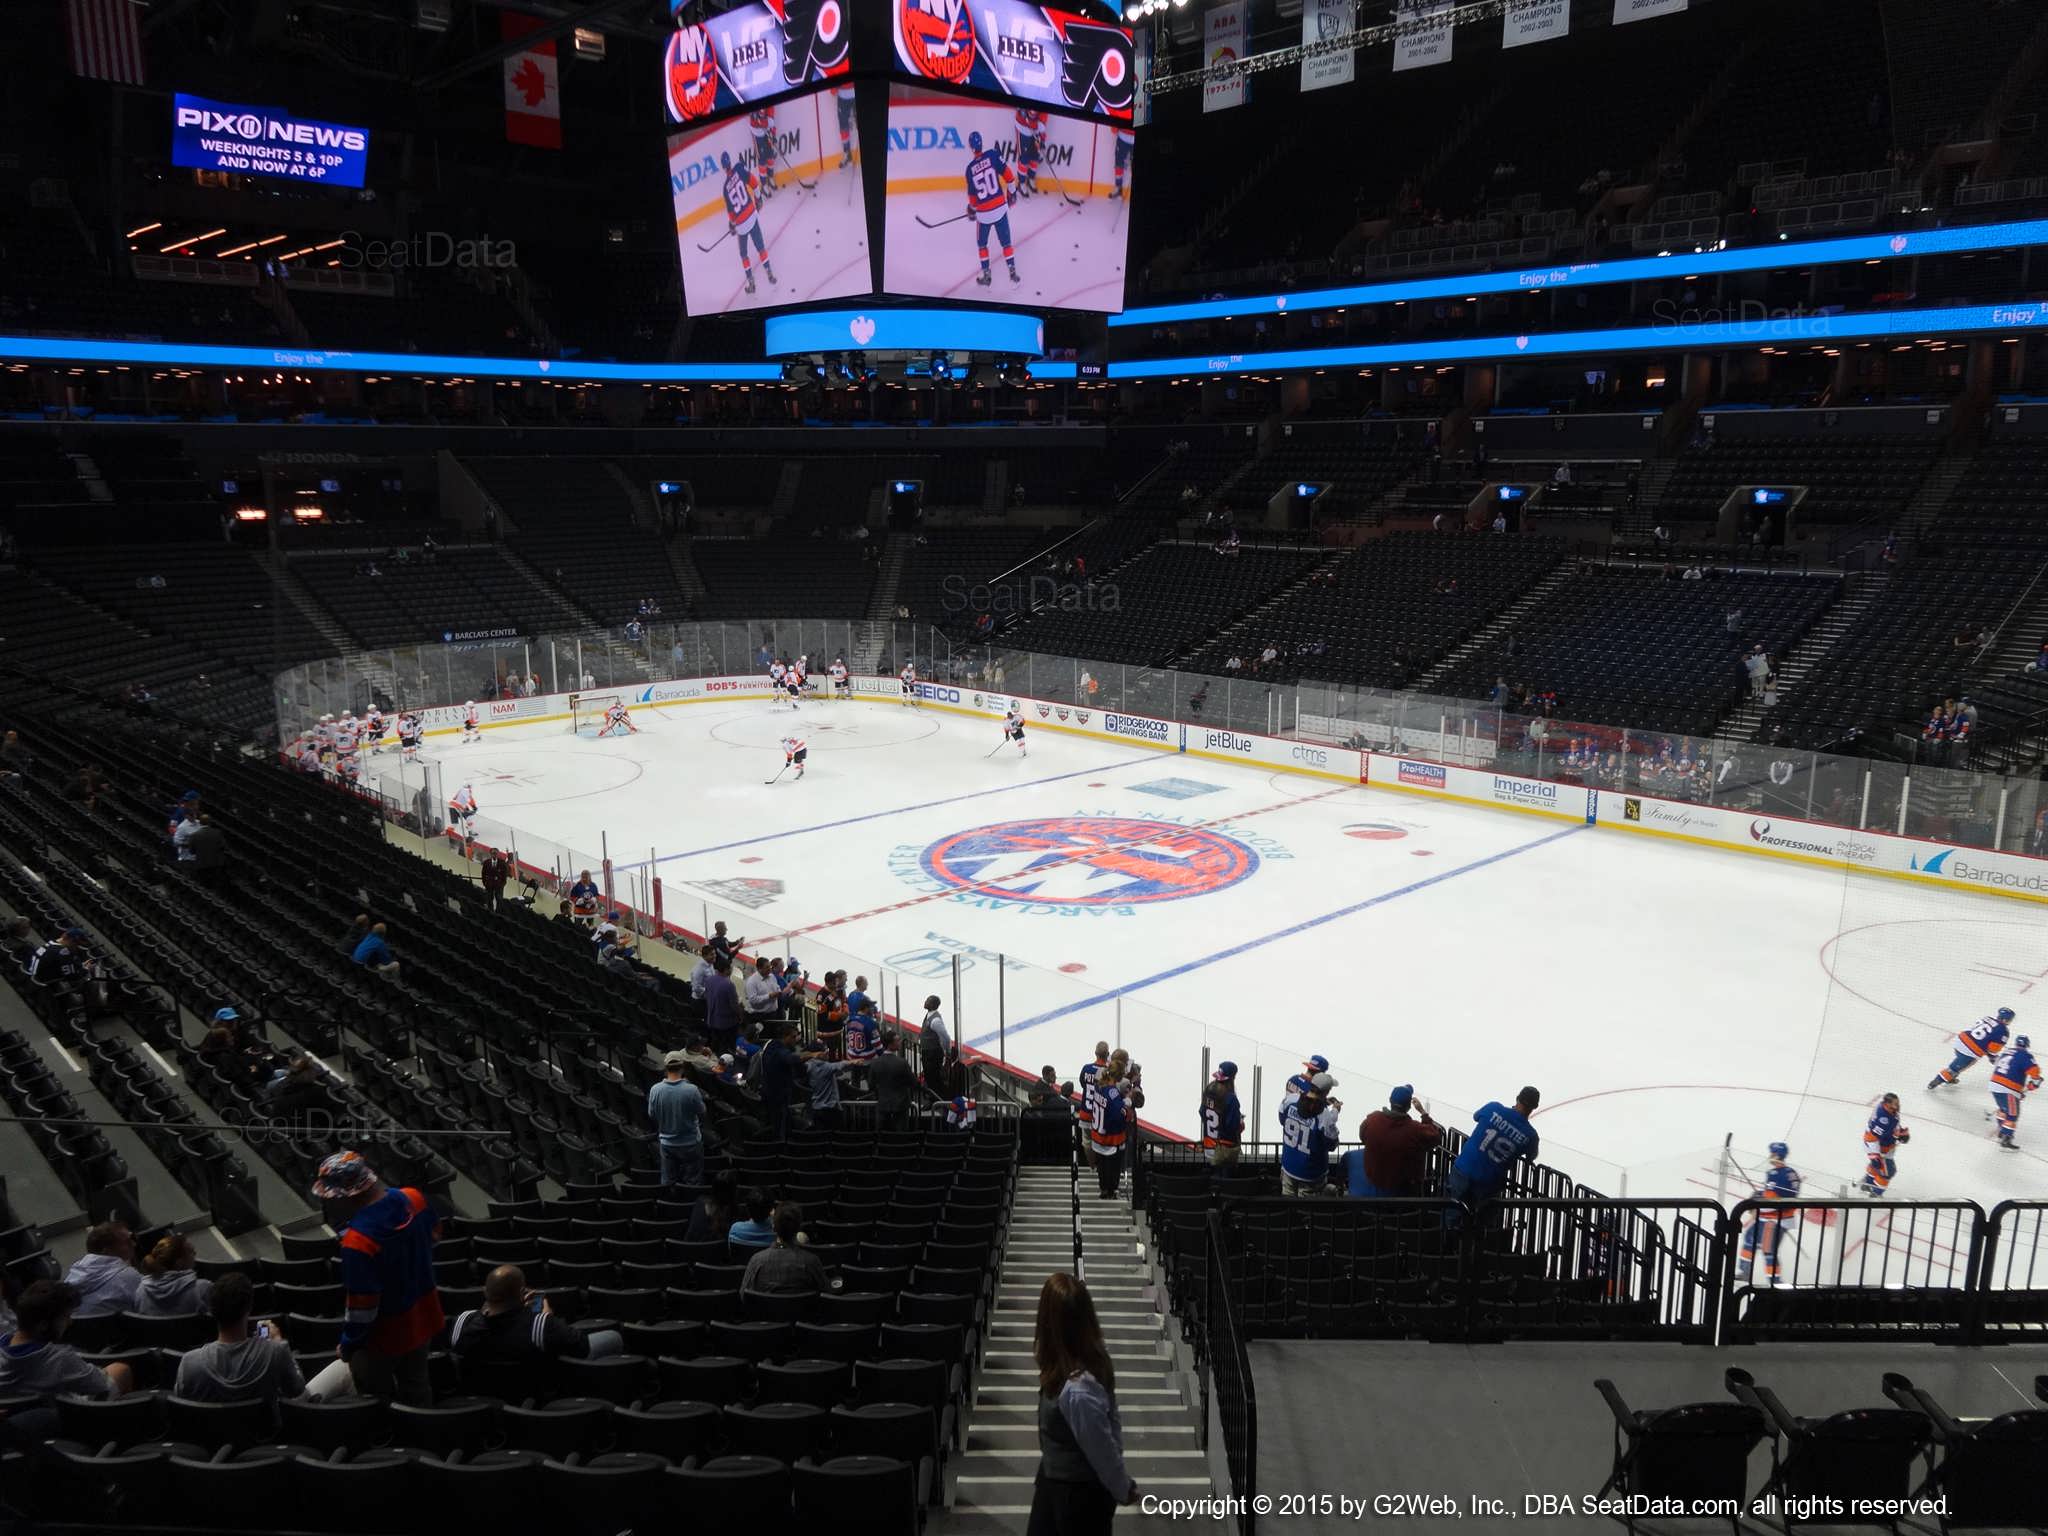 Seat View from Section 104 at the Barclays Center, home of the New York Islanders